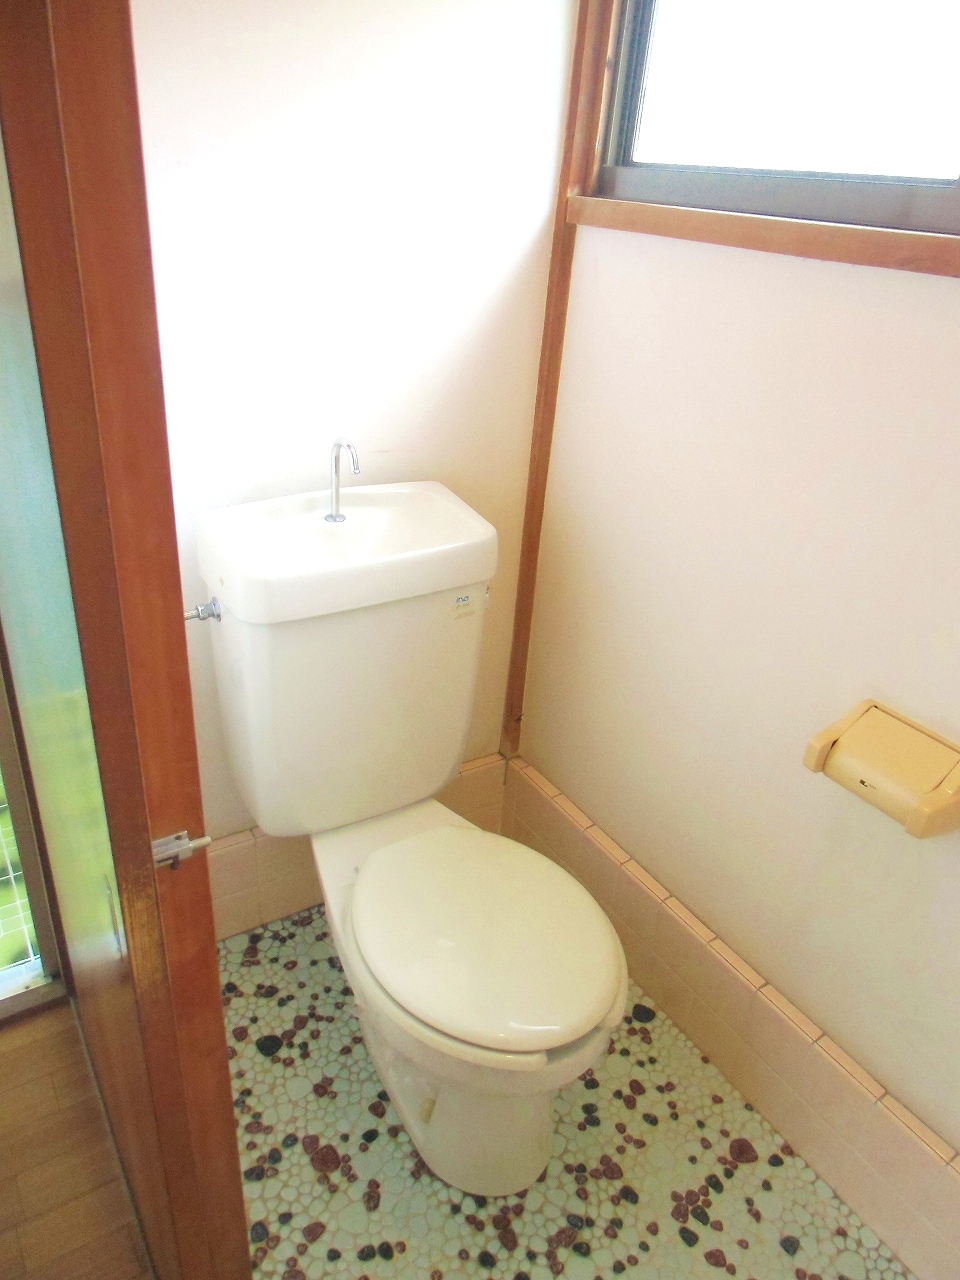 Toilet. It will be Western-style flush toilet